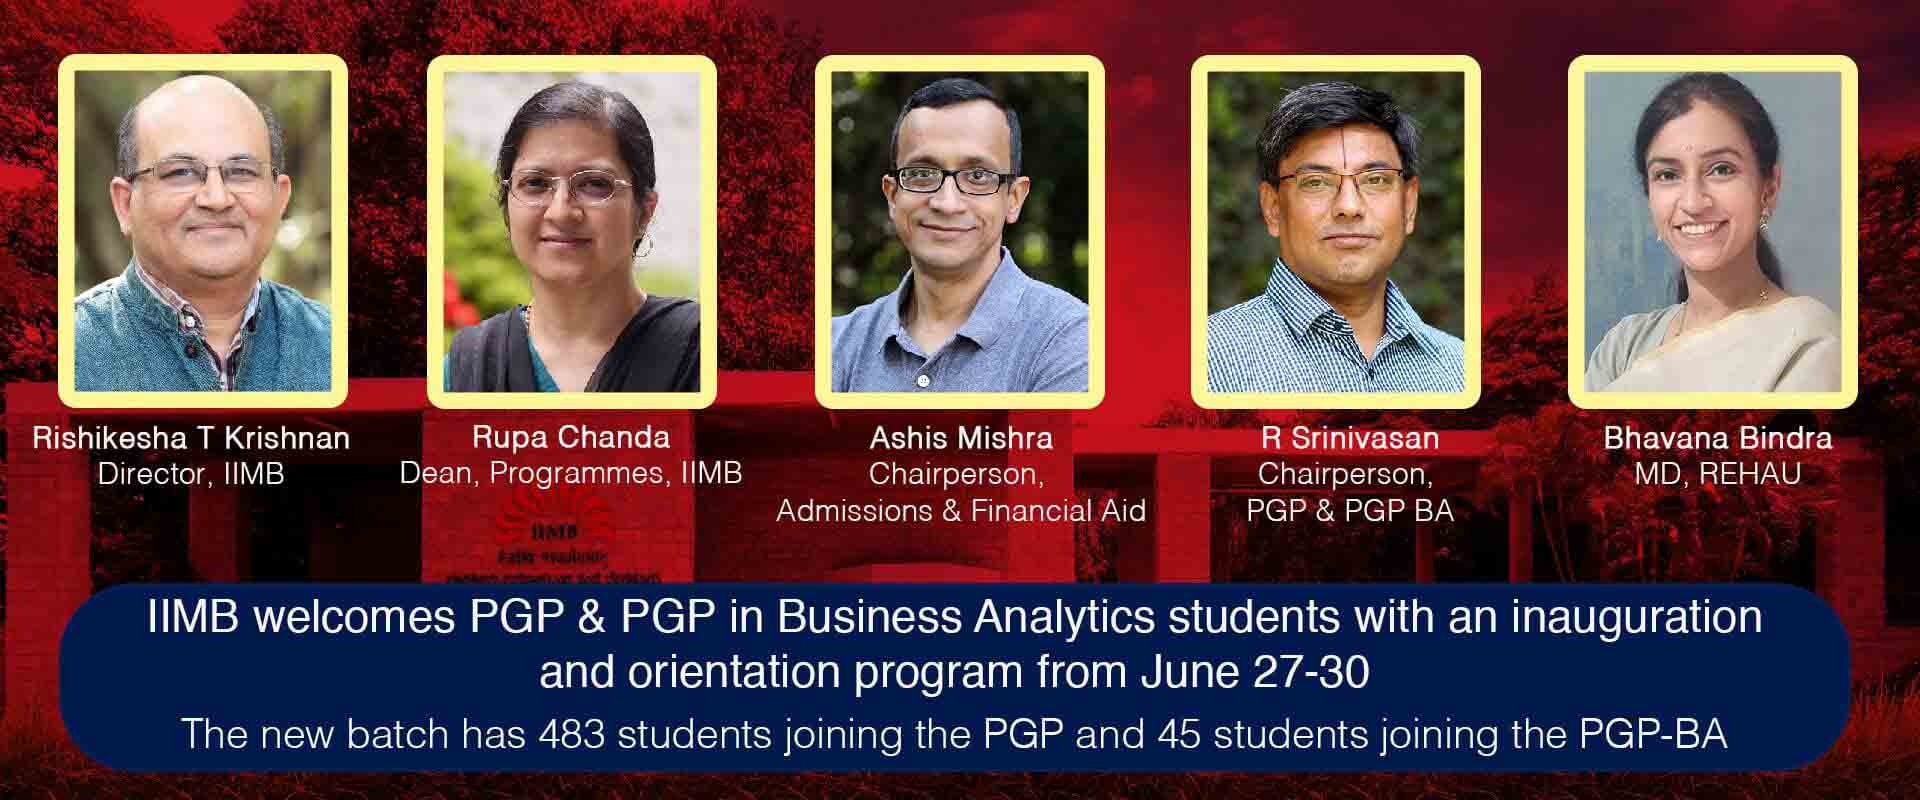 IIMB welcomes PGP & PGP in Business Analytics students with an inauguration and orientation program from June 27-30